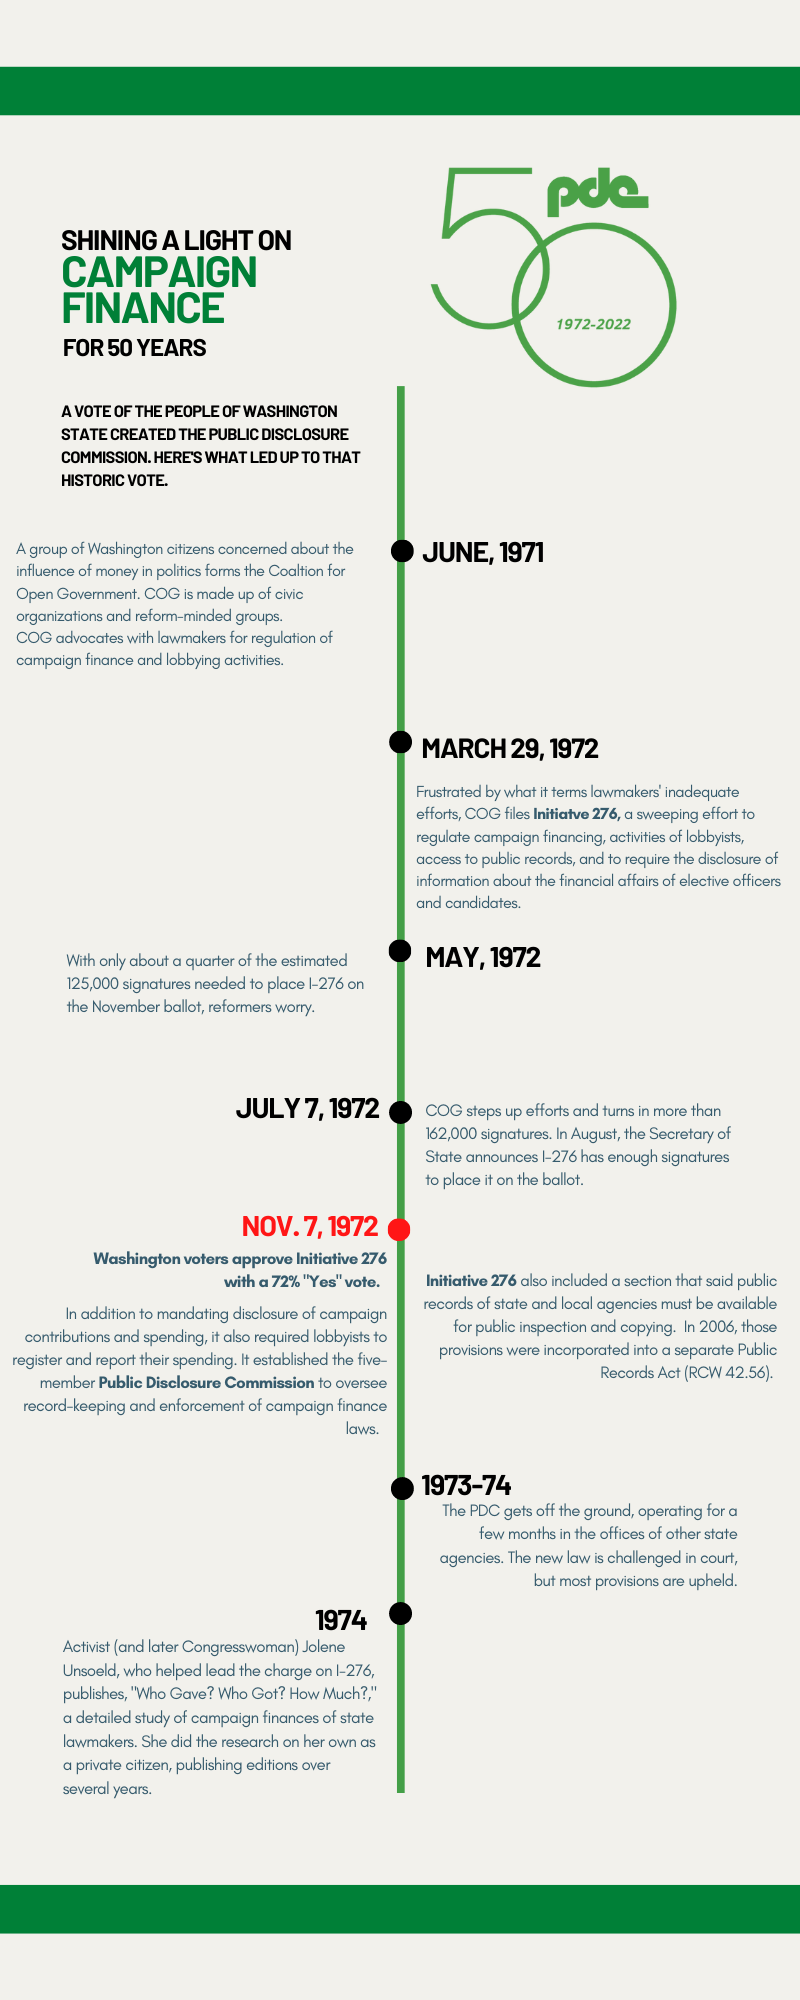 Timeline of early PDC history including date of Nov. 7, 1972 approval of Initiative 276